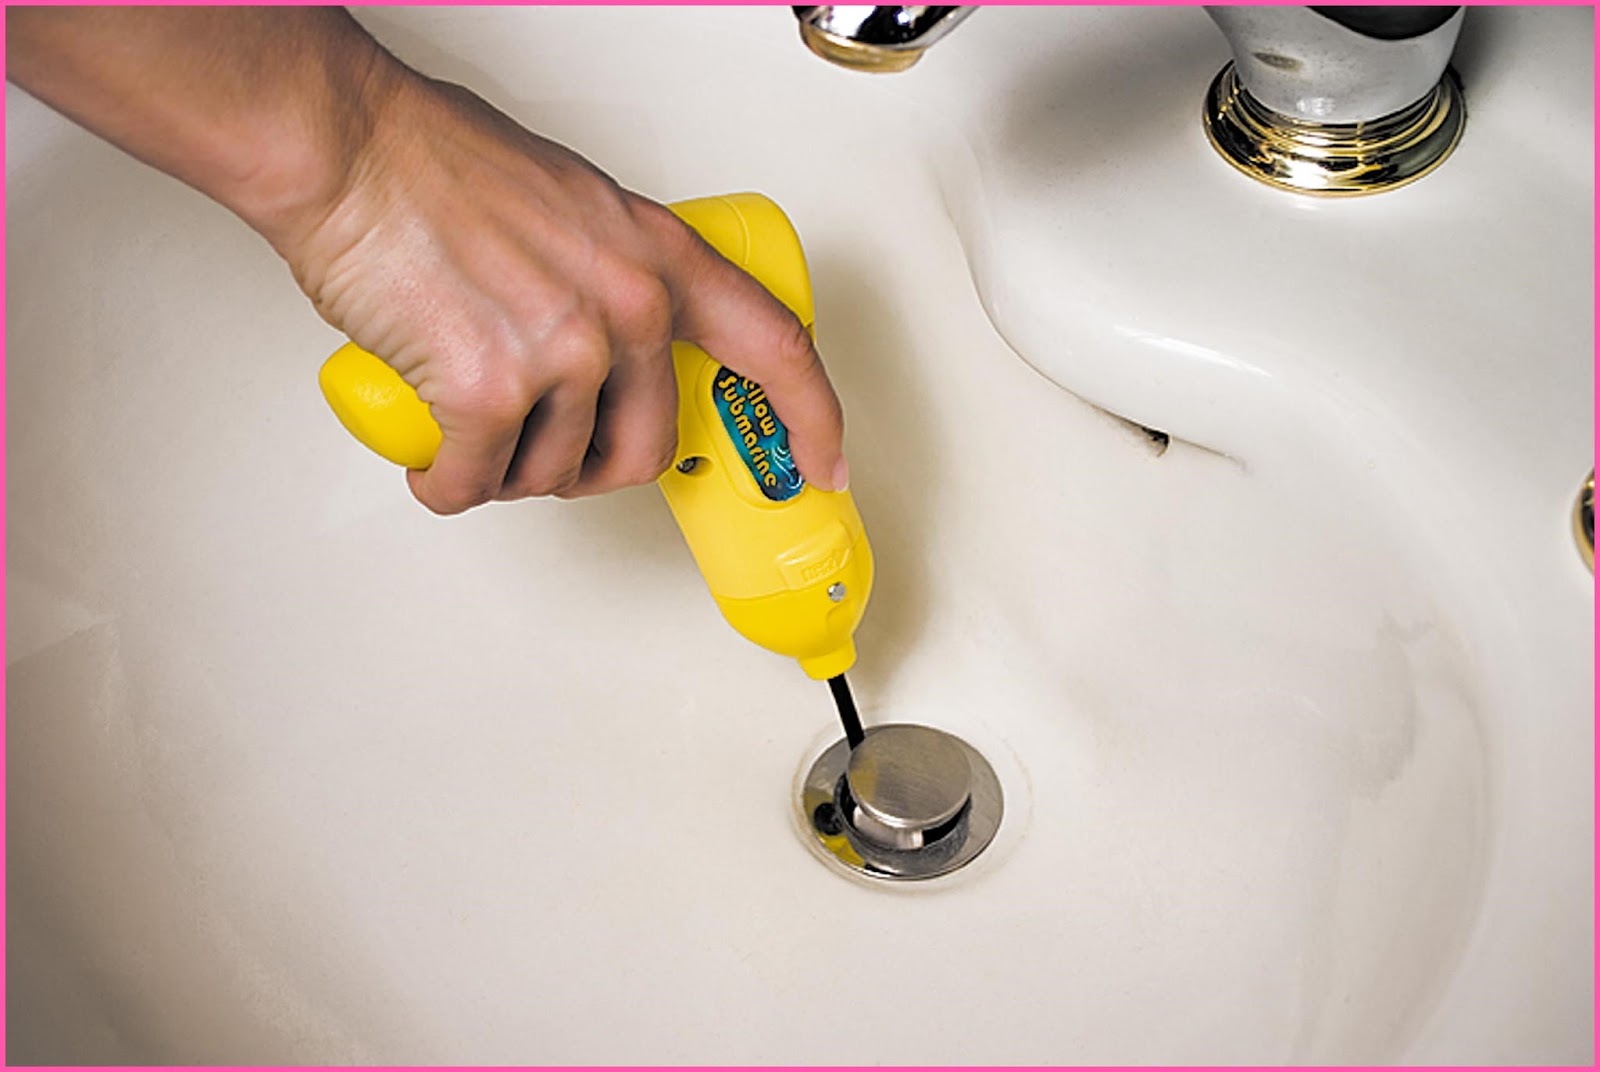 7 Unclog The Kitchen Sink  Tips to Unclog Your Shower Drain â€“ Campus Socialite Unclog,The,Kitchen,Sink